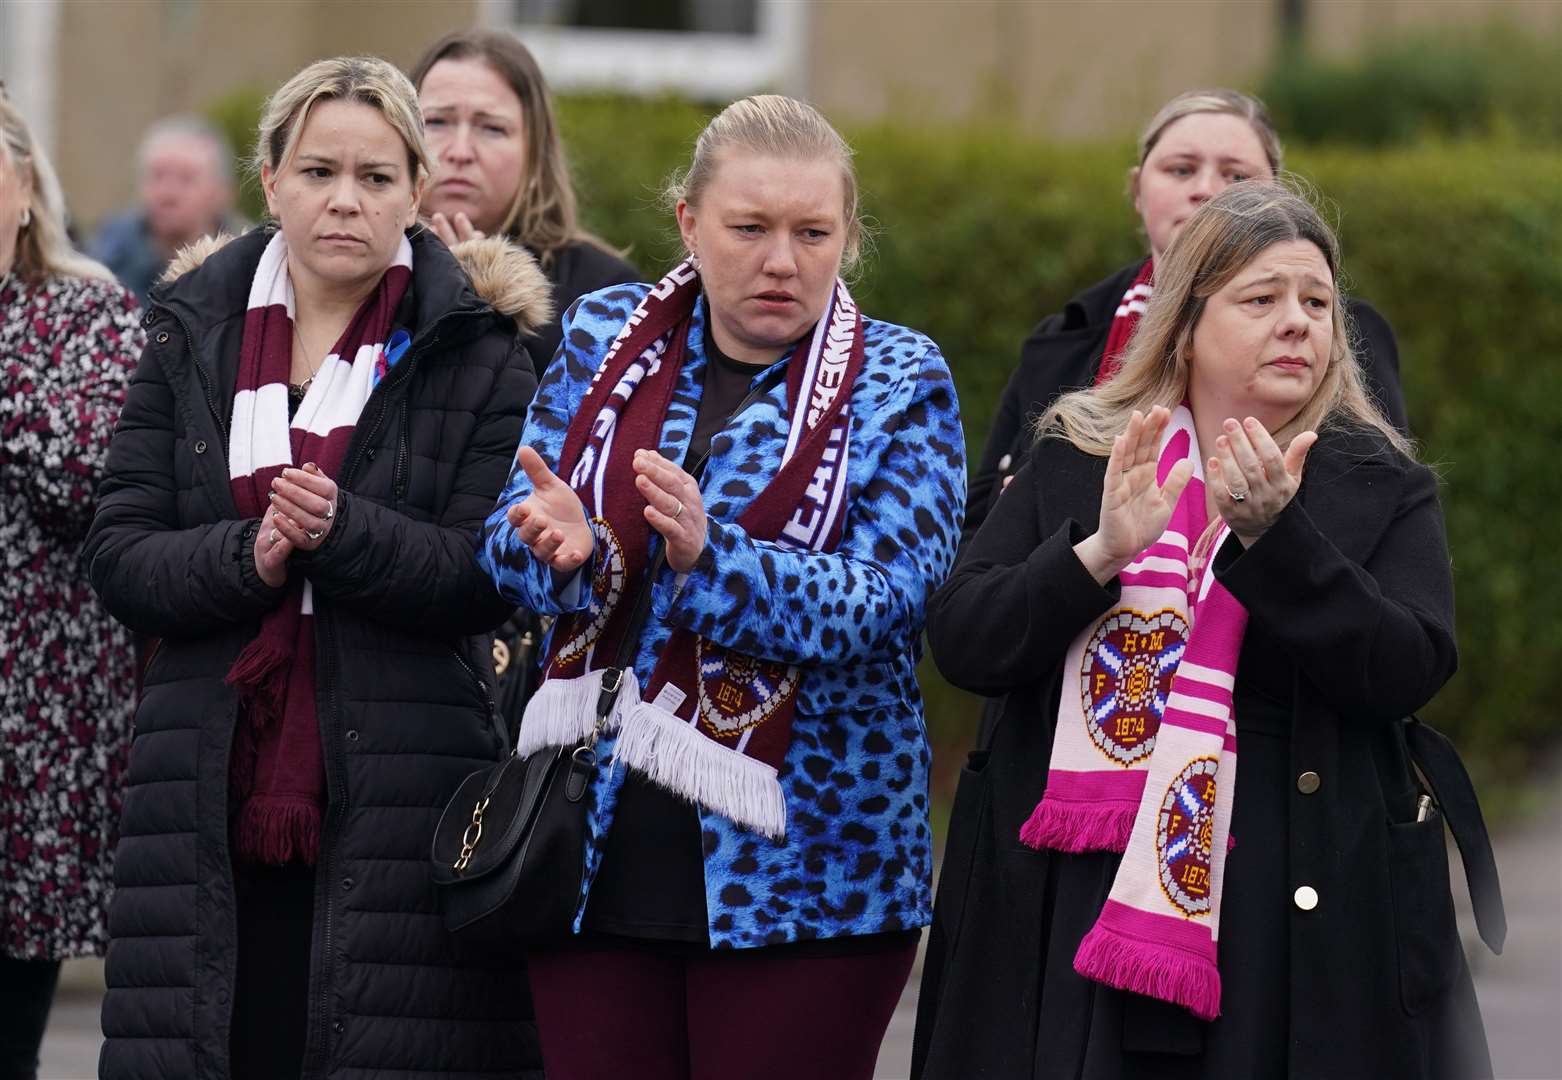 Mourners clapped as the funeral cortege left the church (Andrew Milligan/PA)